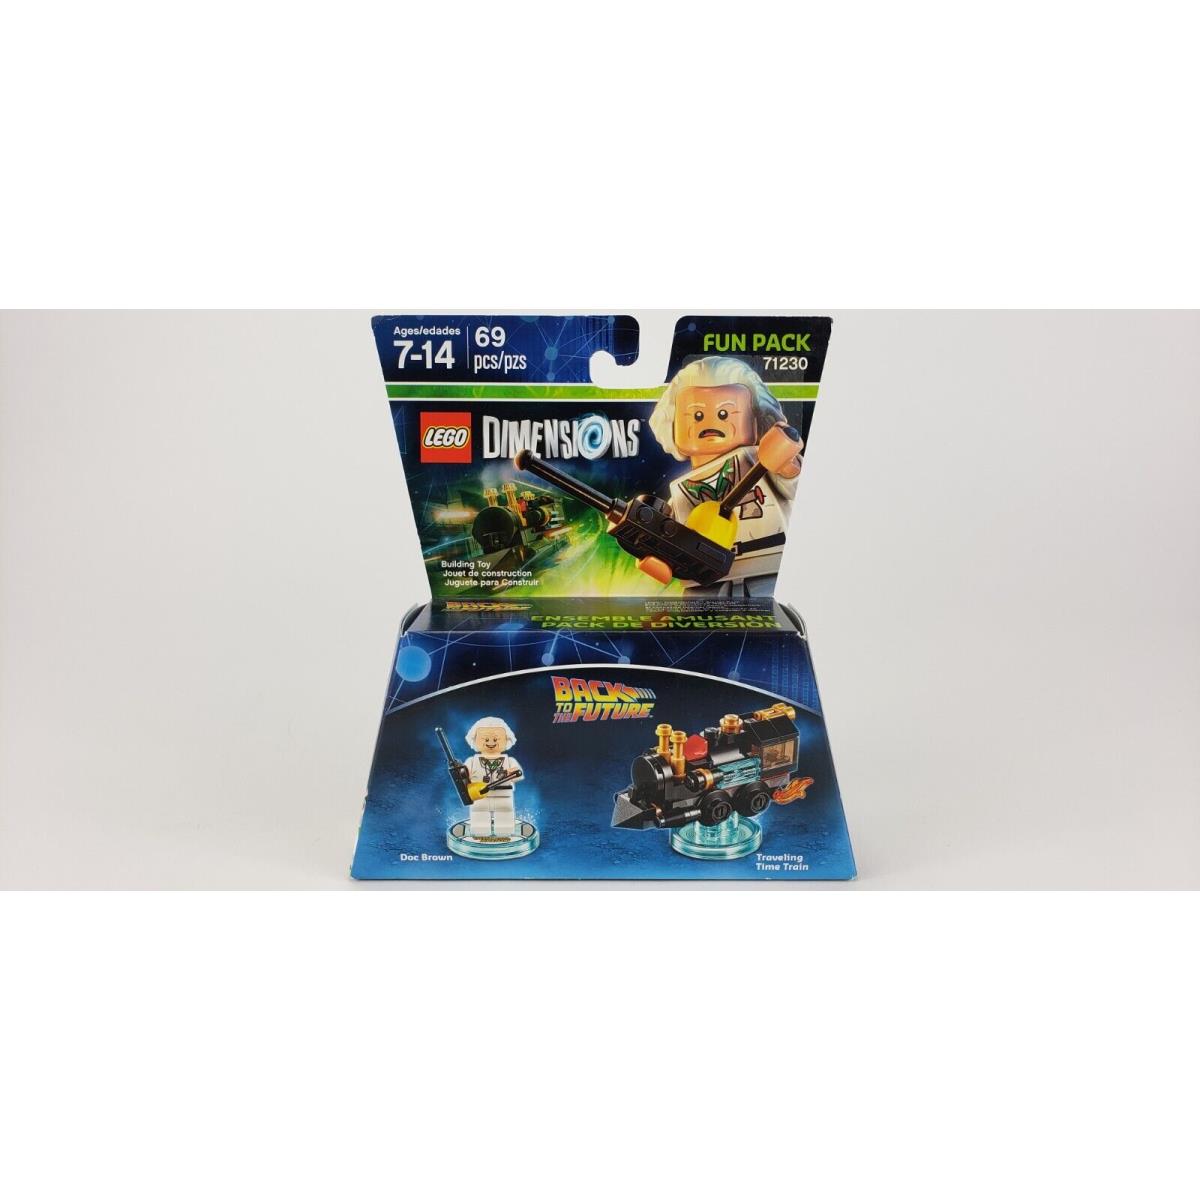 Lego Dimensions Back to Future Fun Pack 71230 PS4 PS3 Xbox 360 One Wii U